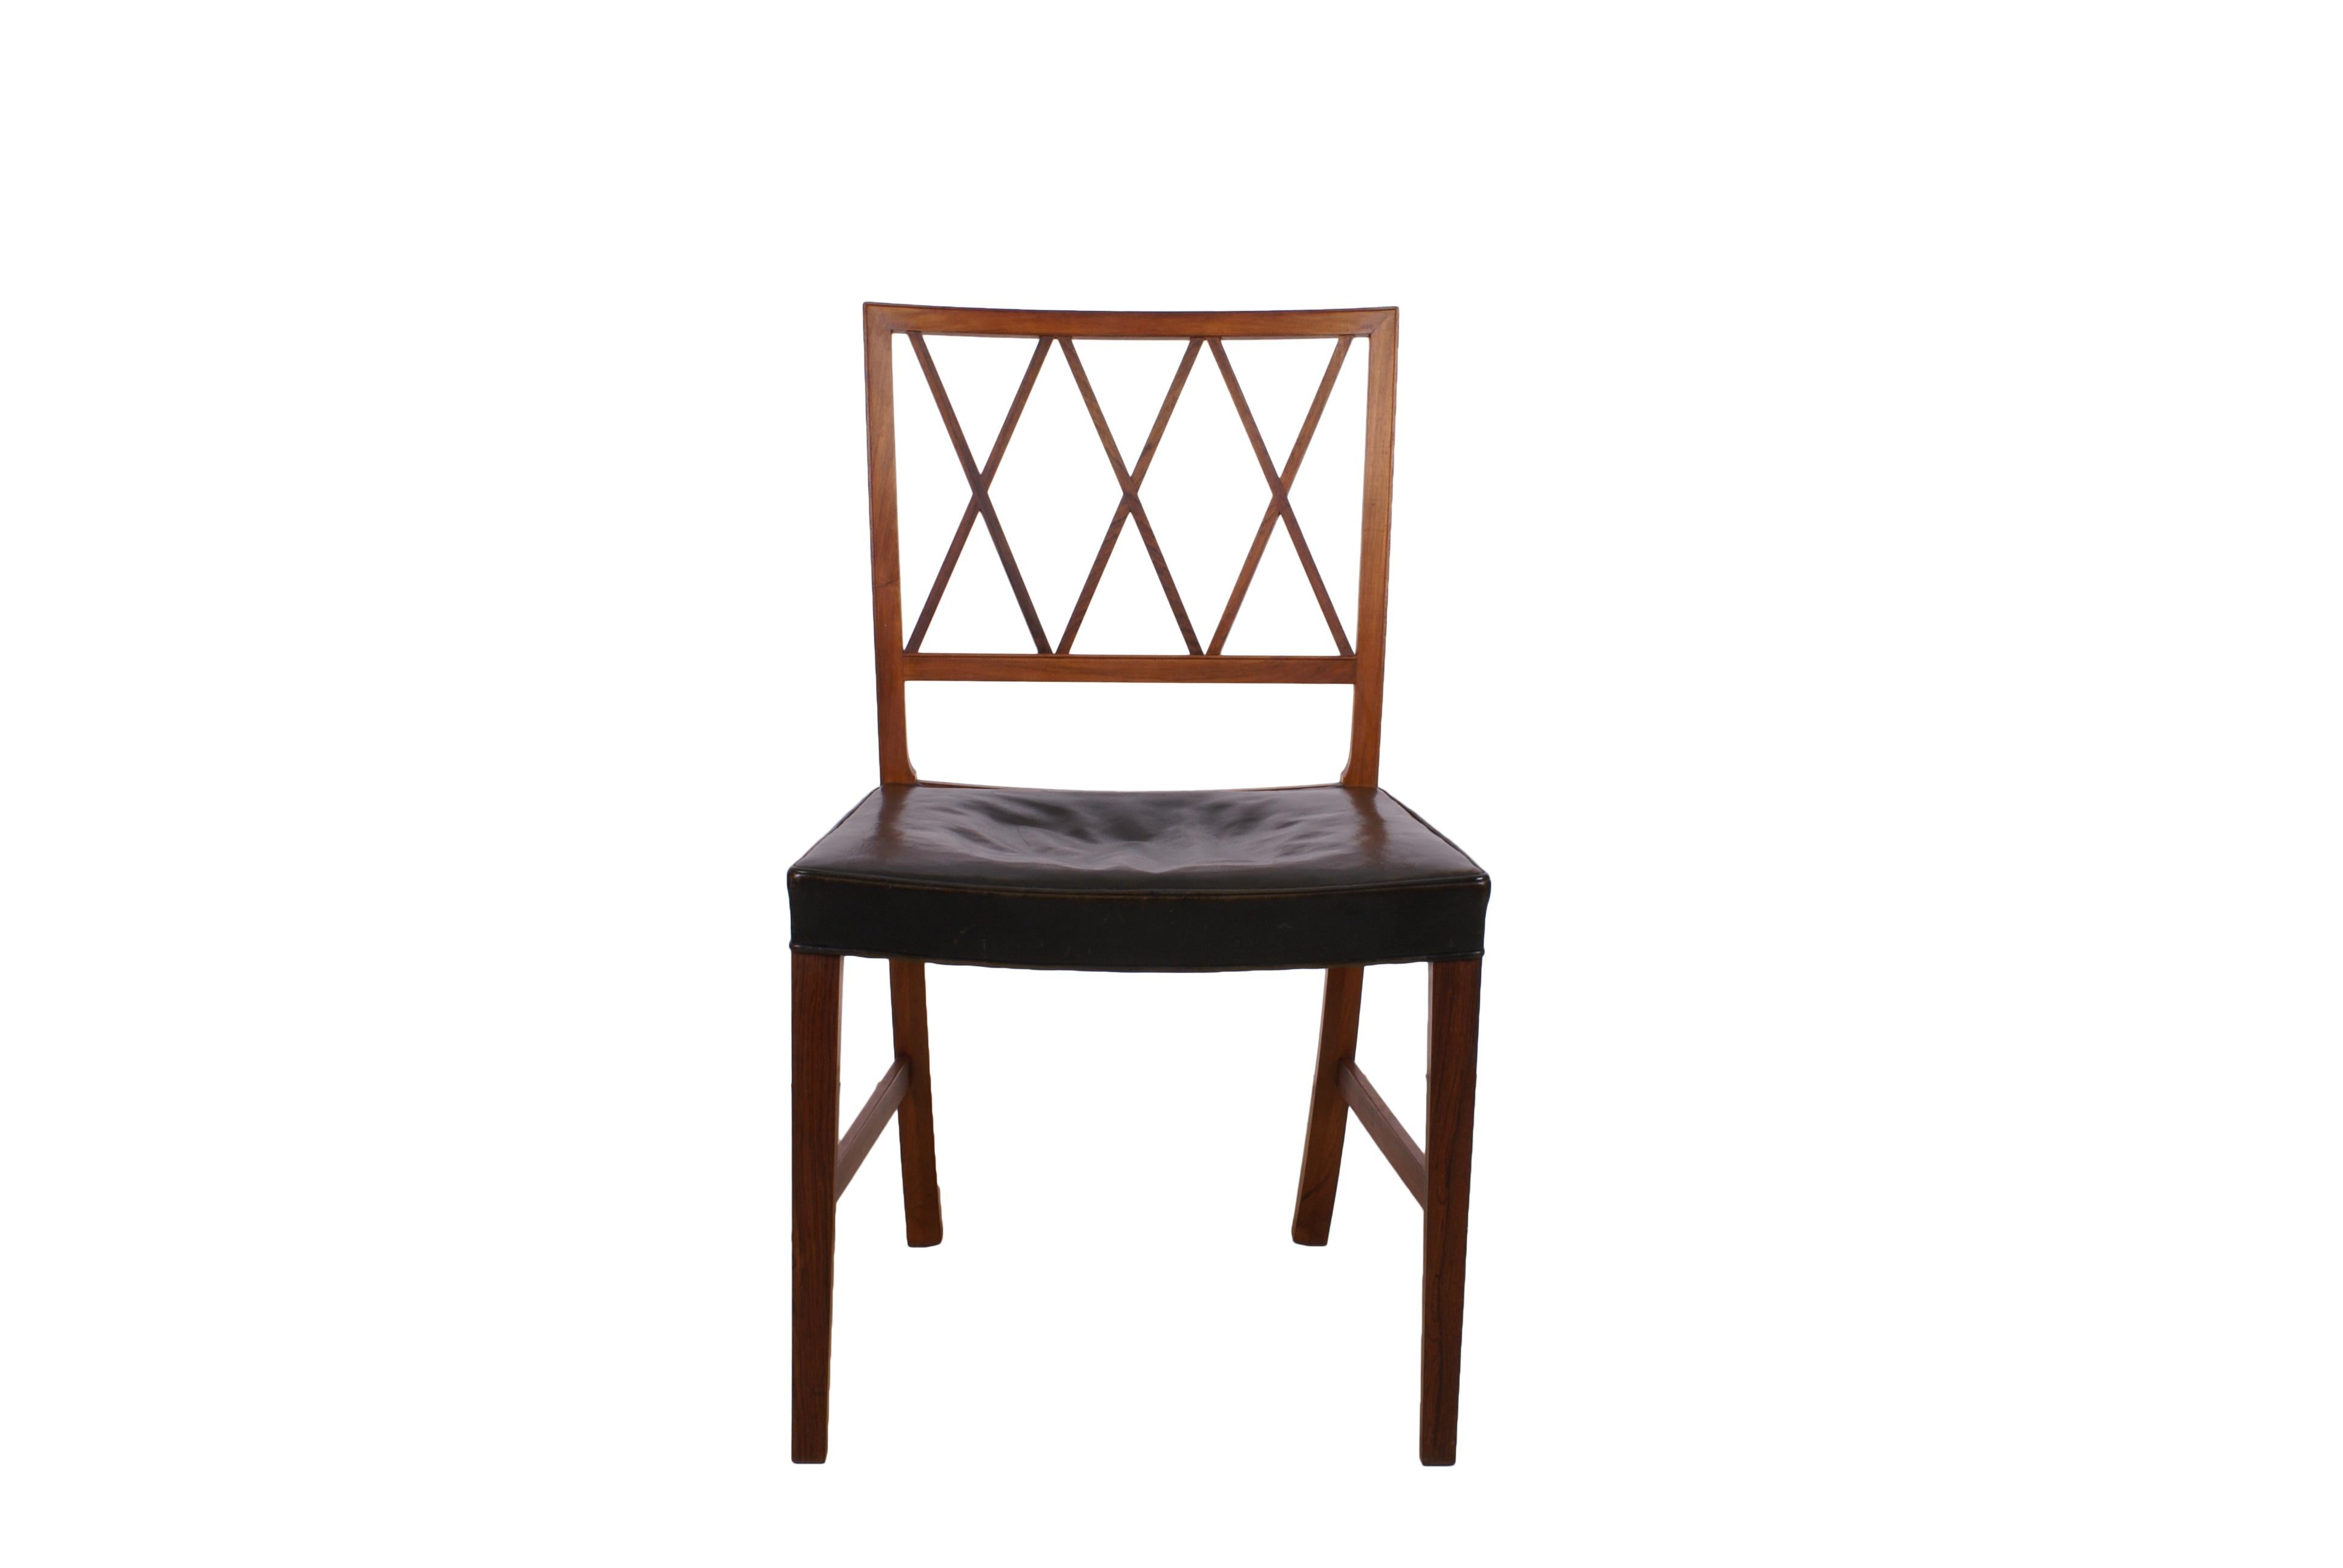 Ole Wanscher, set of 8 dining chairs in Brazilian rosewood for master cabinetmaker A.J. Iversen. Seat in original patinated black leather. With metal tag from Illums Bolighus.

Shipping worldwide is possible for these rosewood chairs as seller can